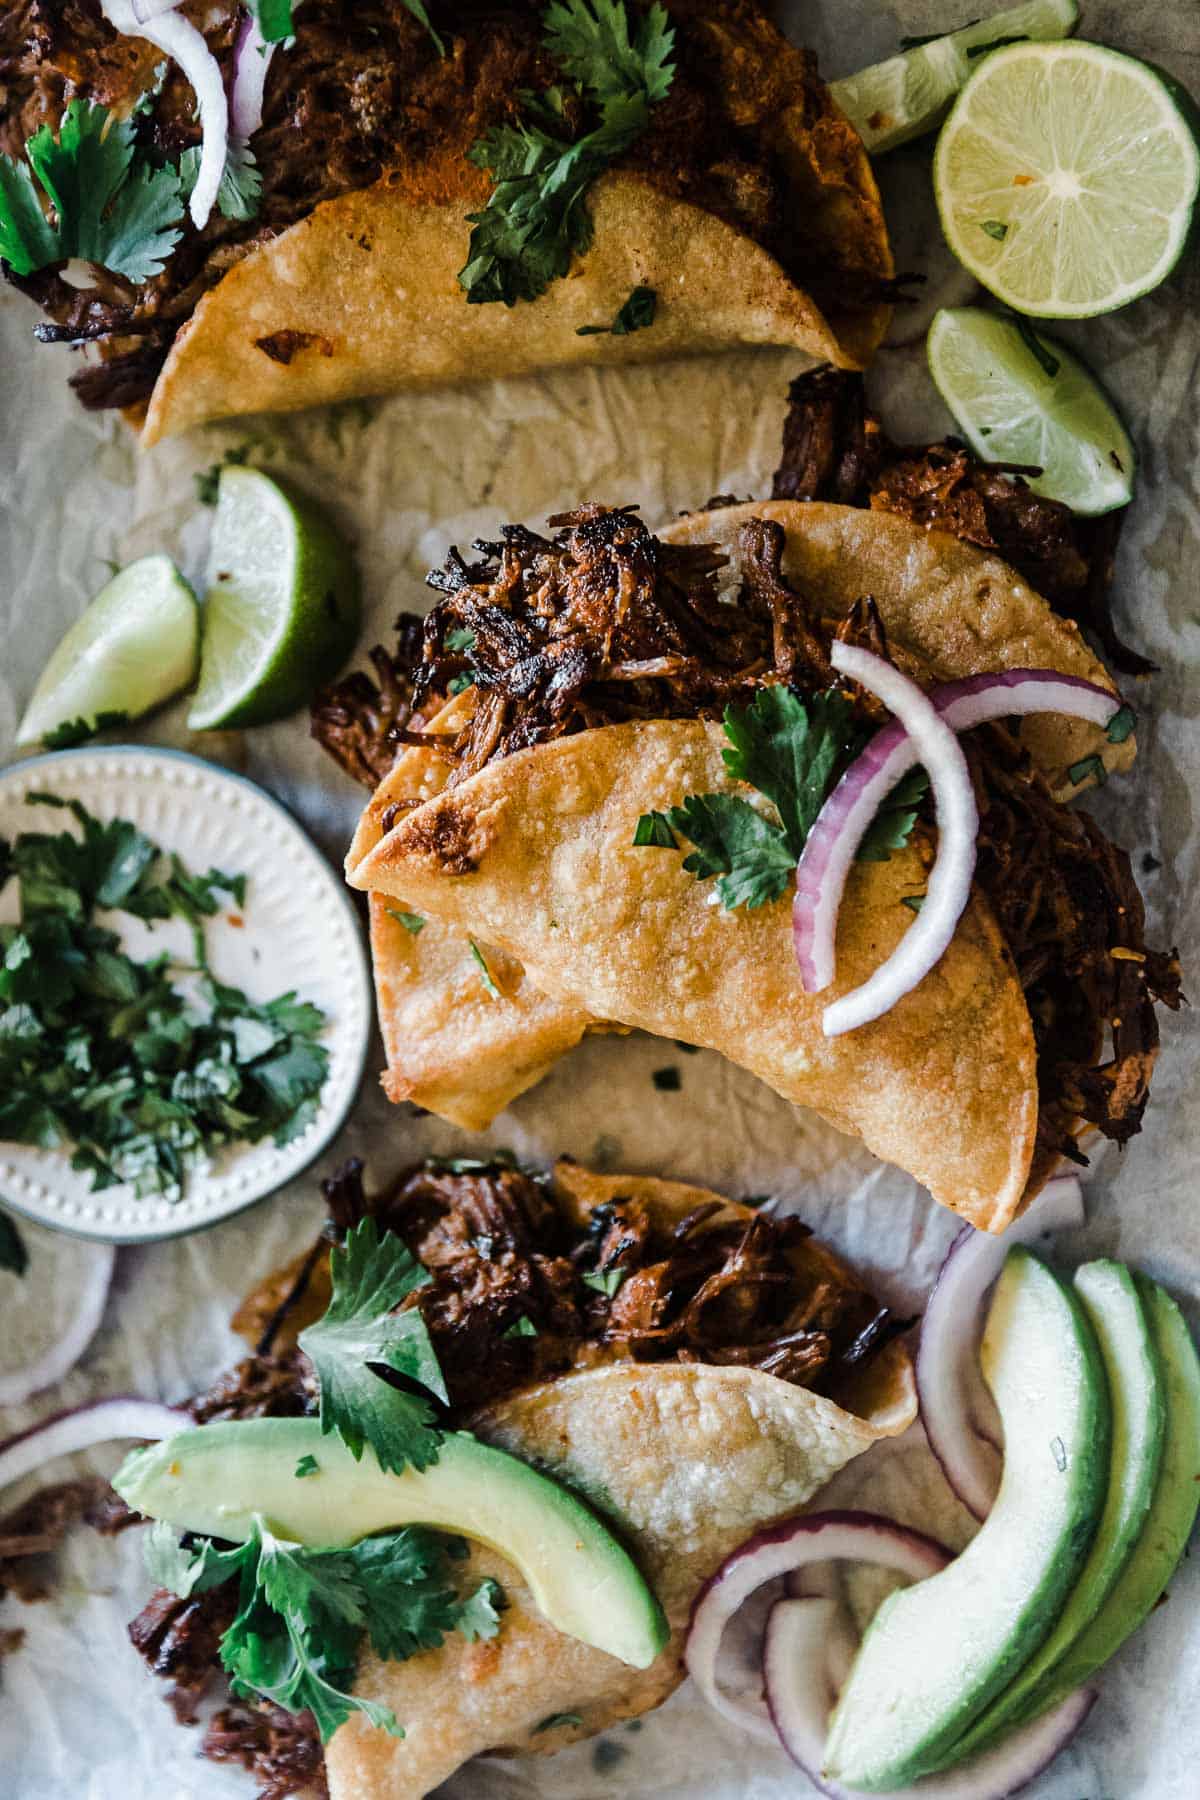 Instant pot barbacoa beef tacos on parchment paper. They are garnished with avocado and red onion.